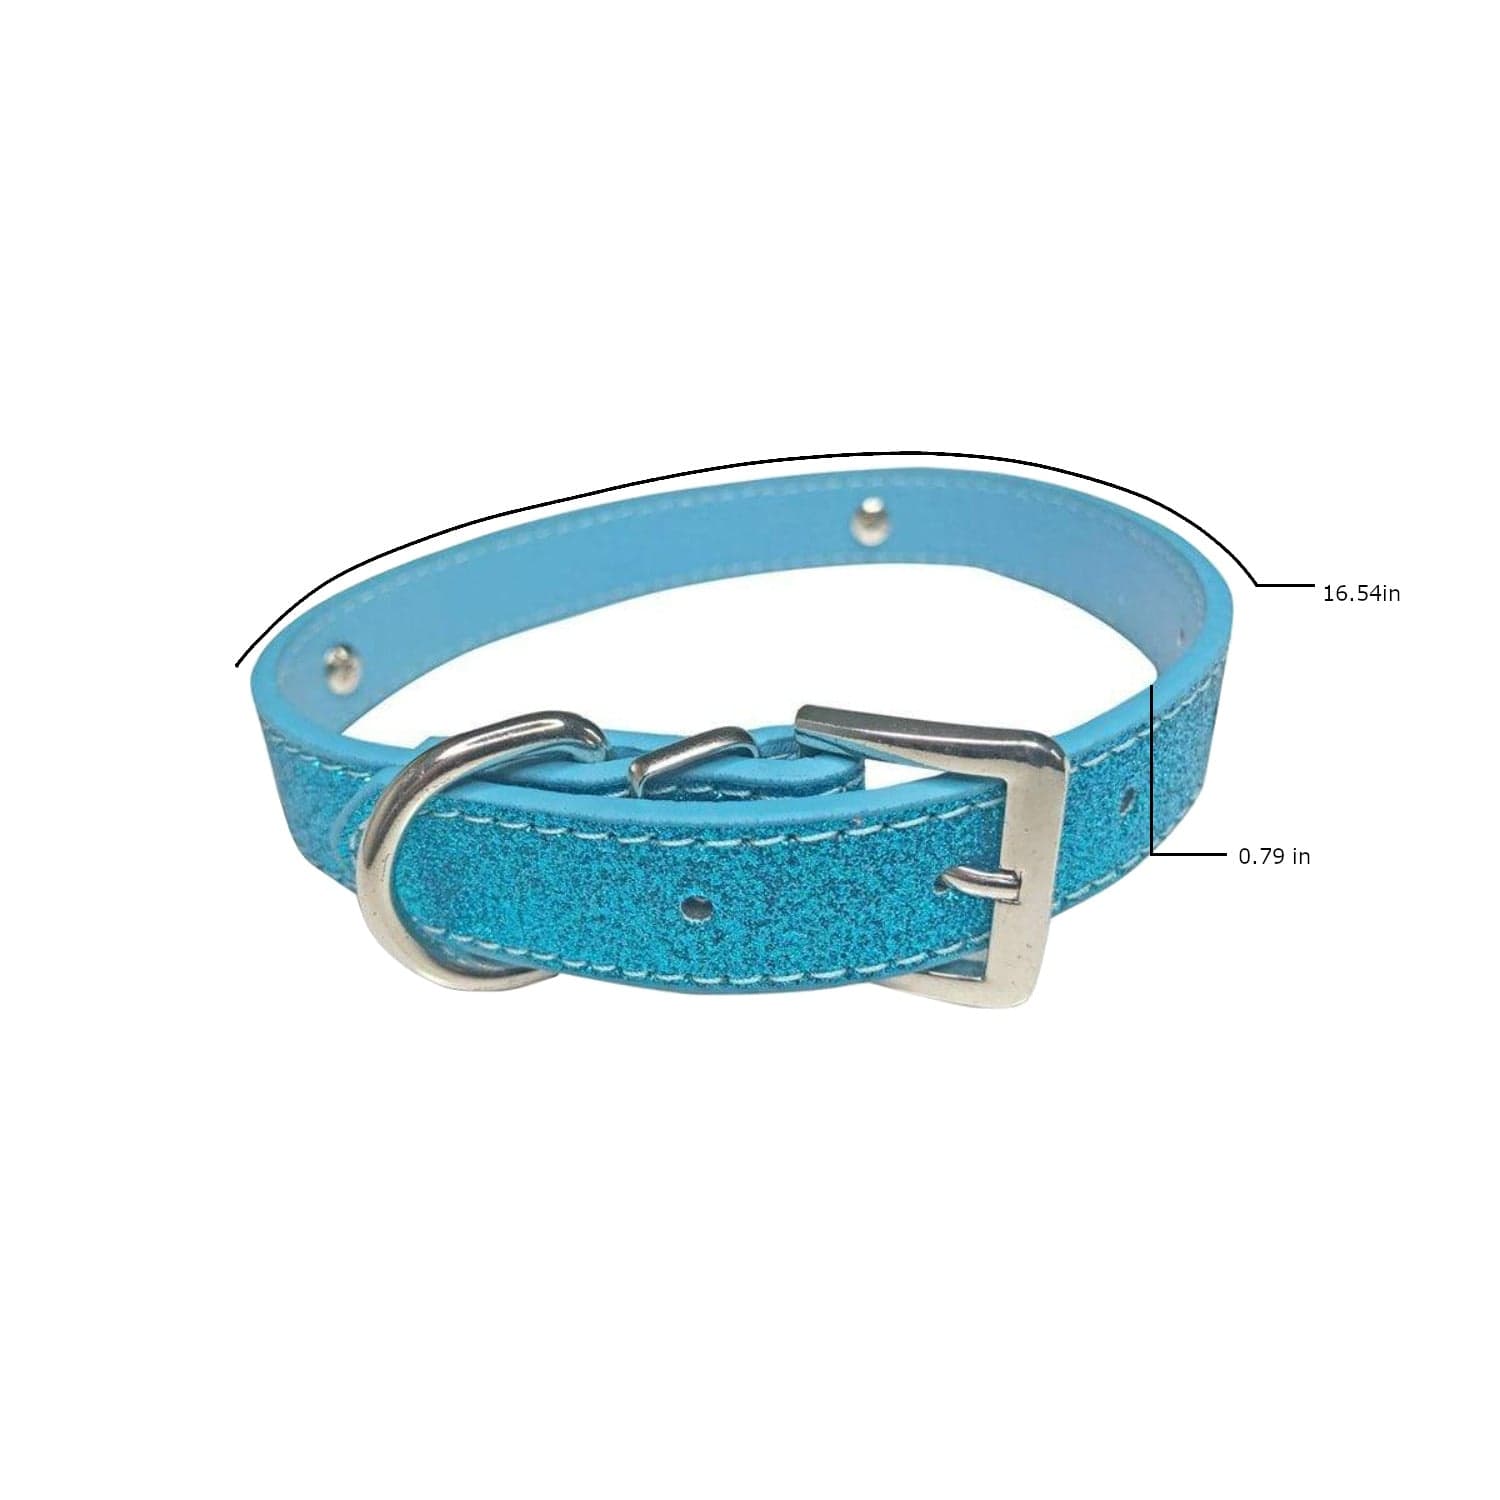 This is an image of Daddies Little Girl Choker Non-Leather Collar showcasing its durable, adjustable buckle.